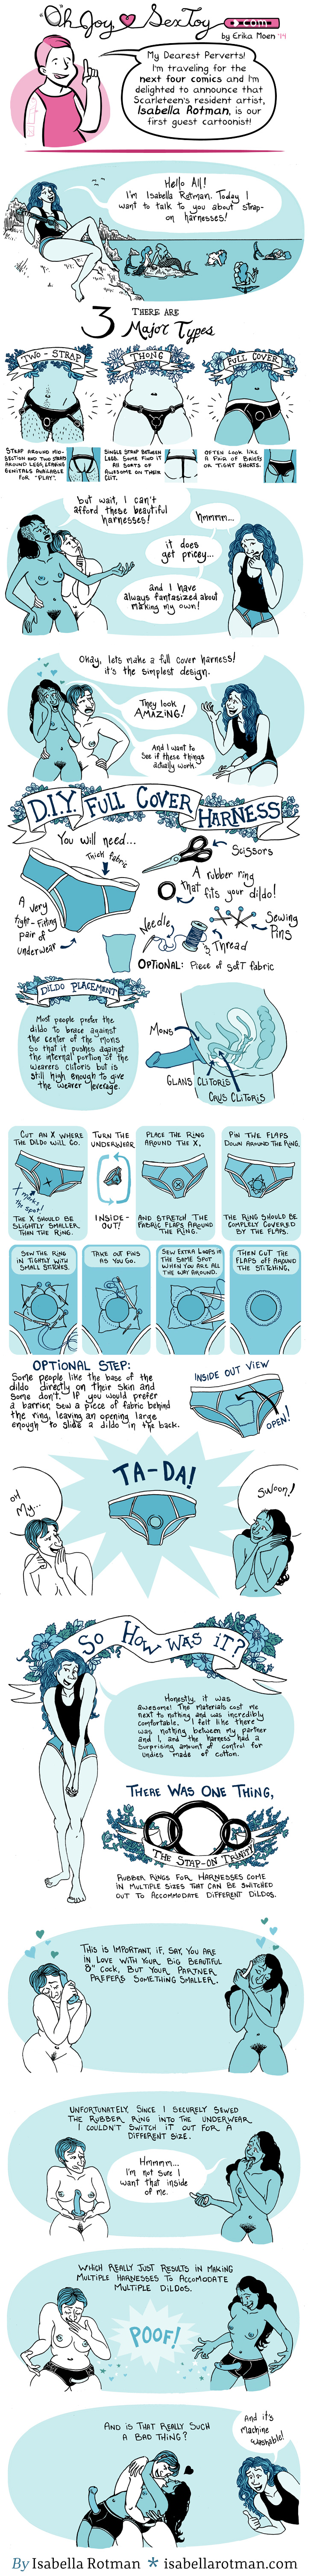 a comic details how to make your own strap-on harness